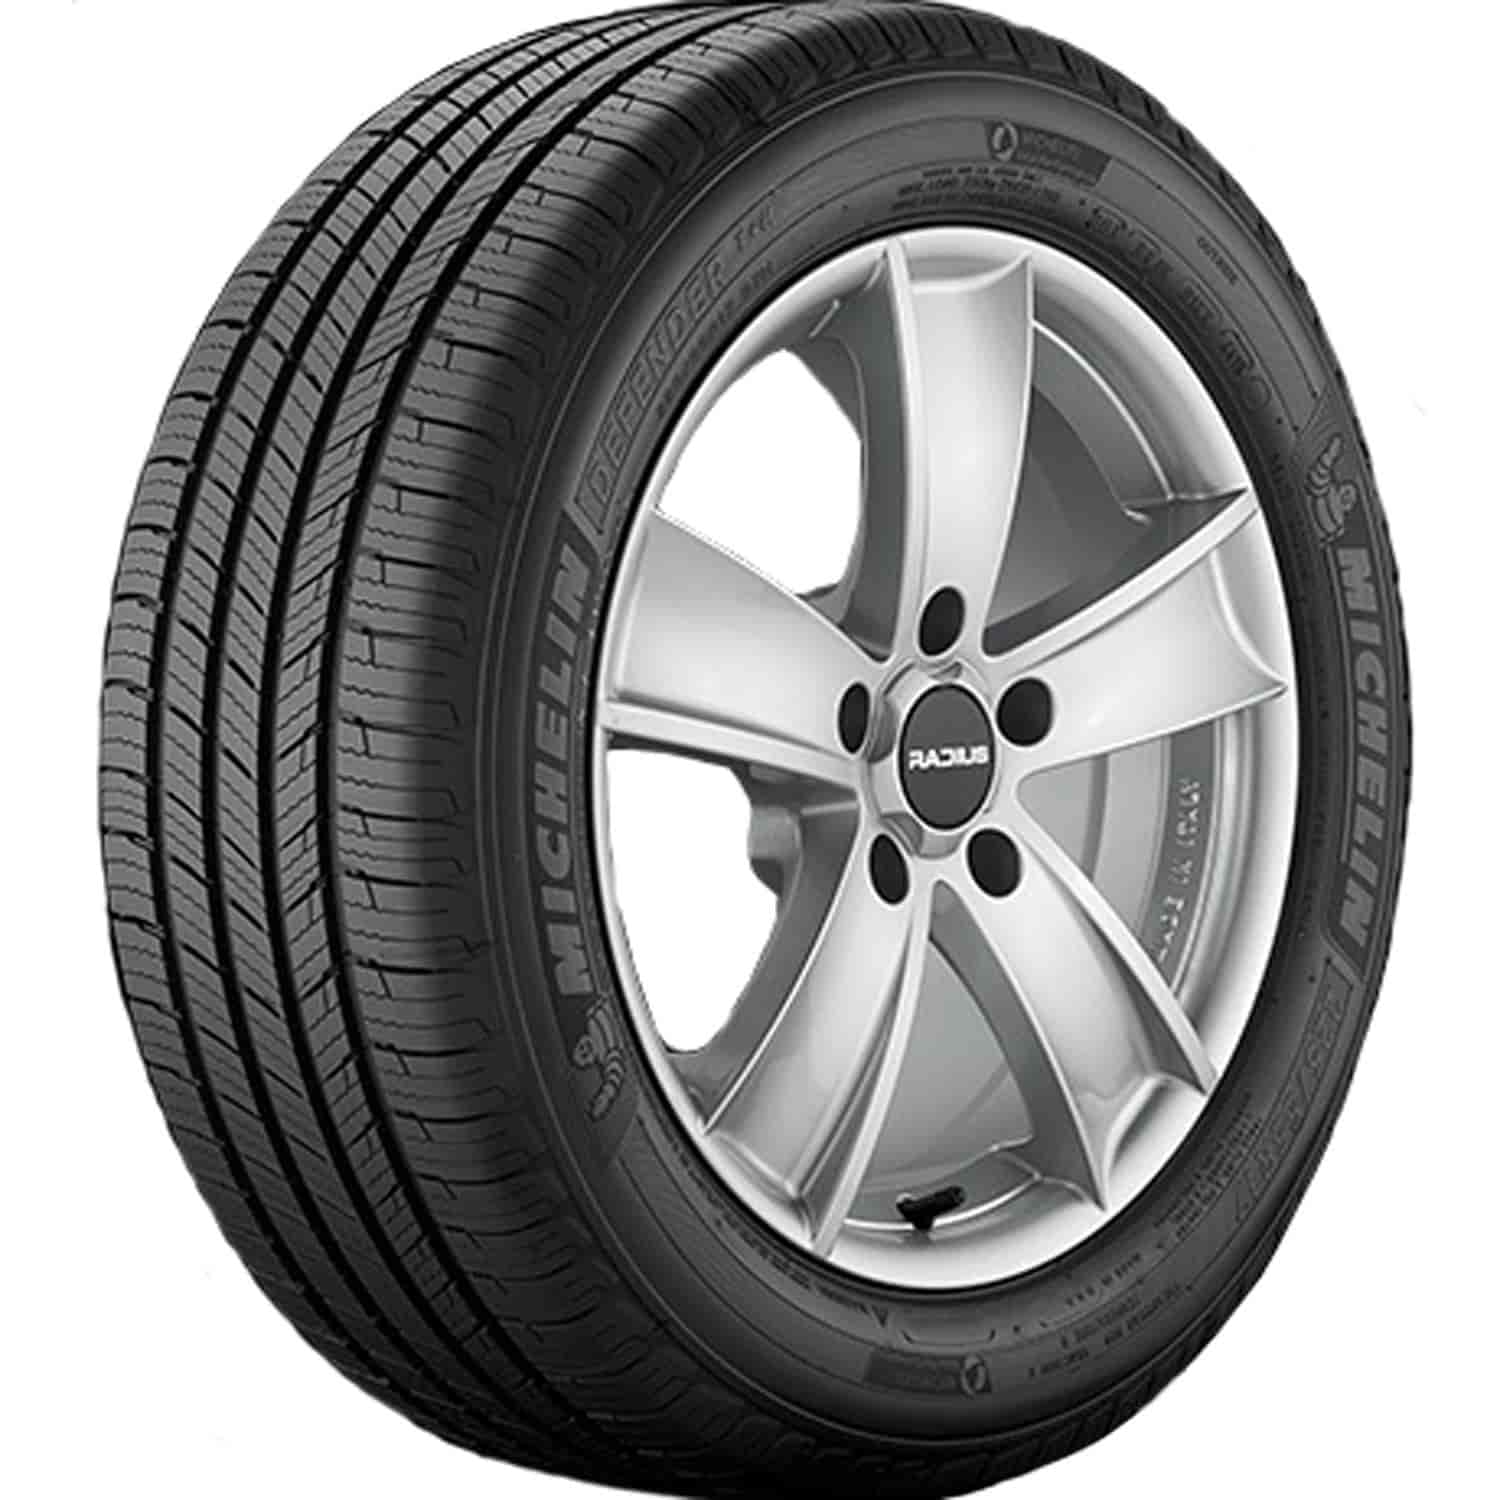 Defender T+H Tire Size:235/55R17